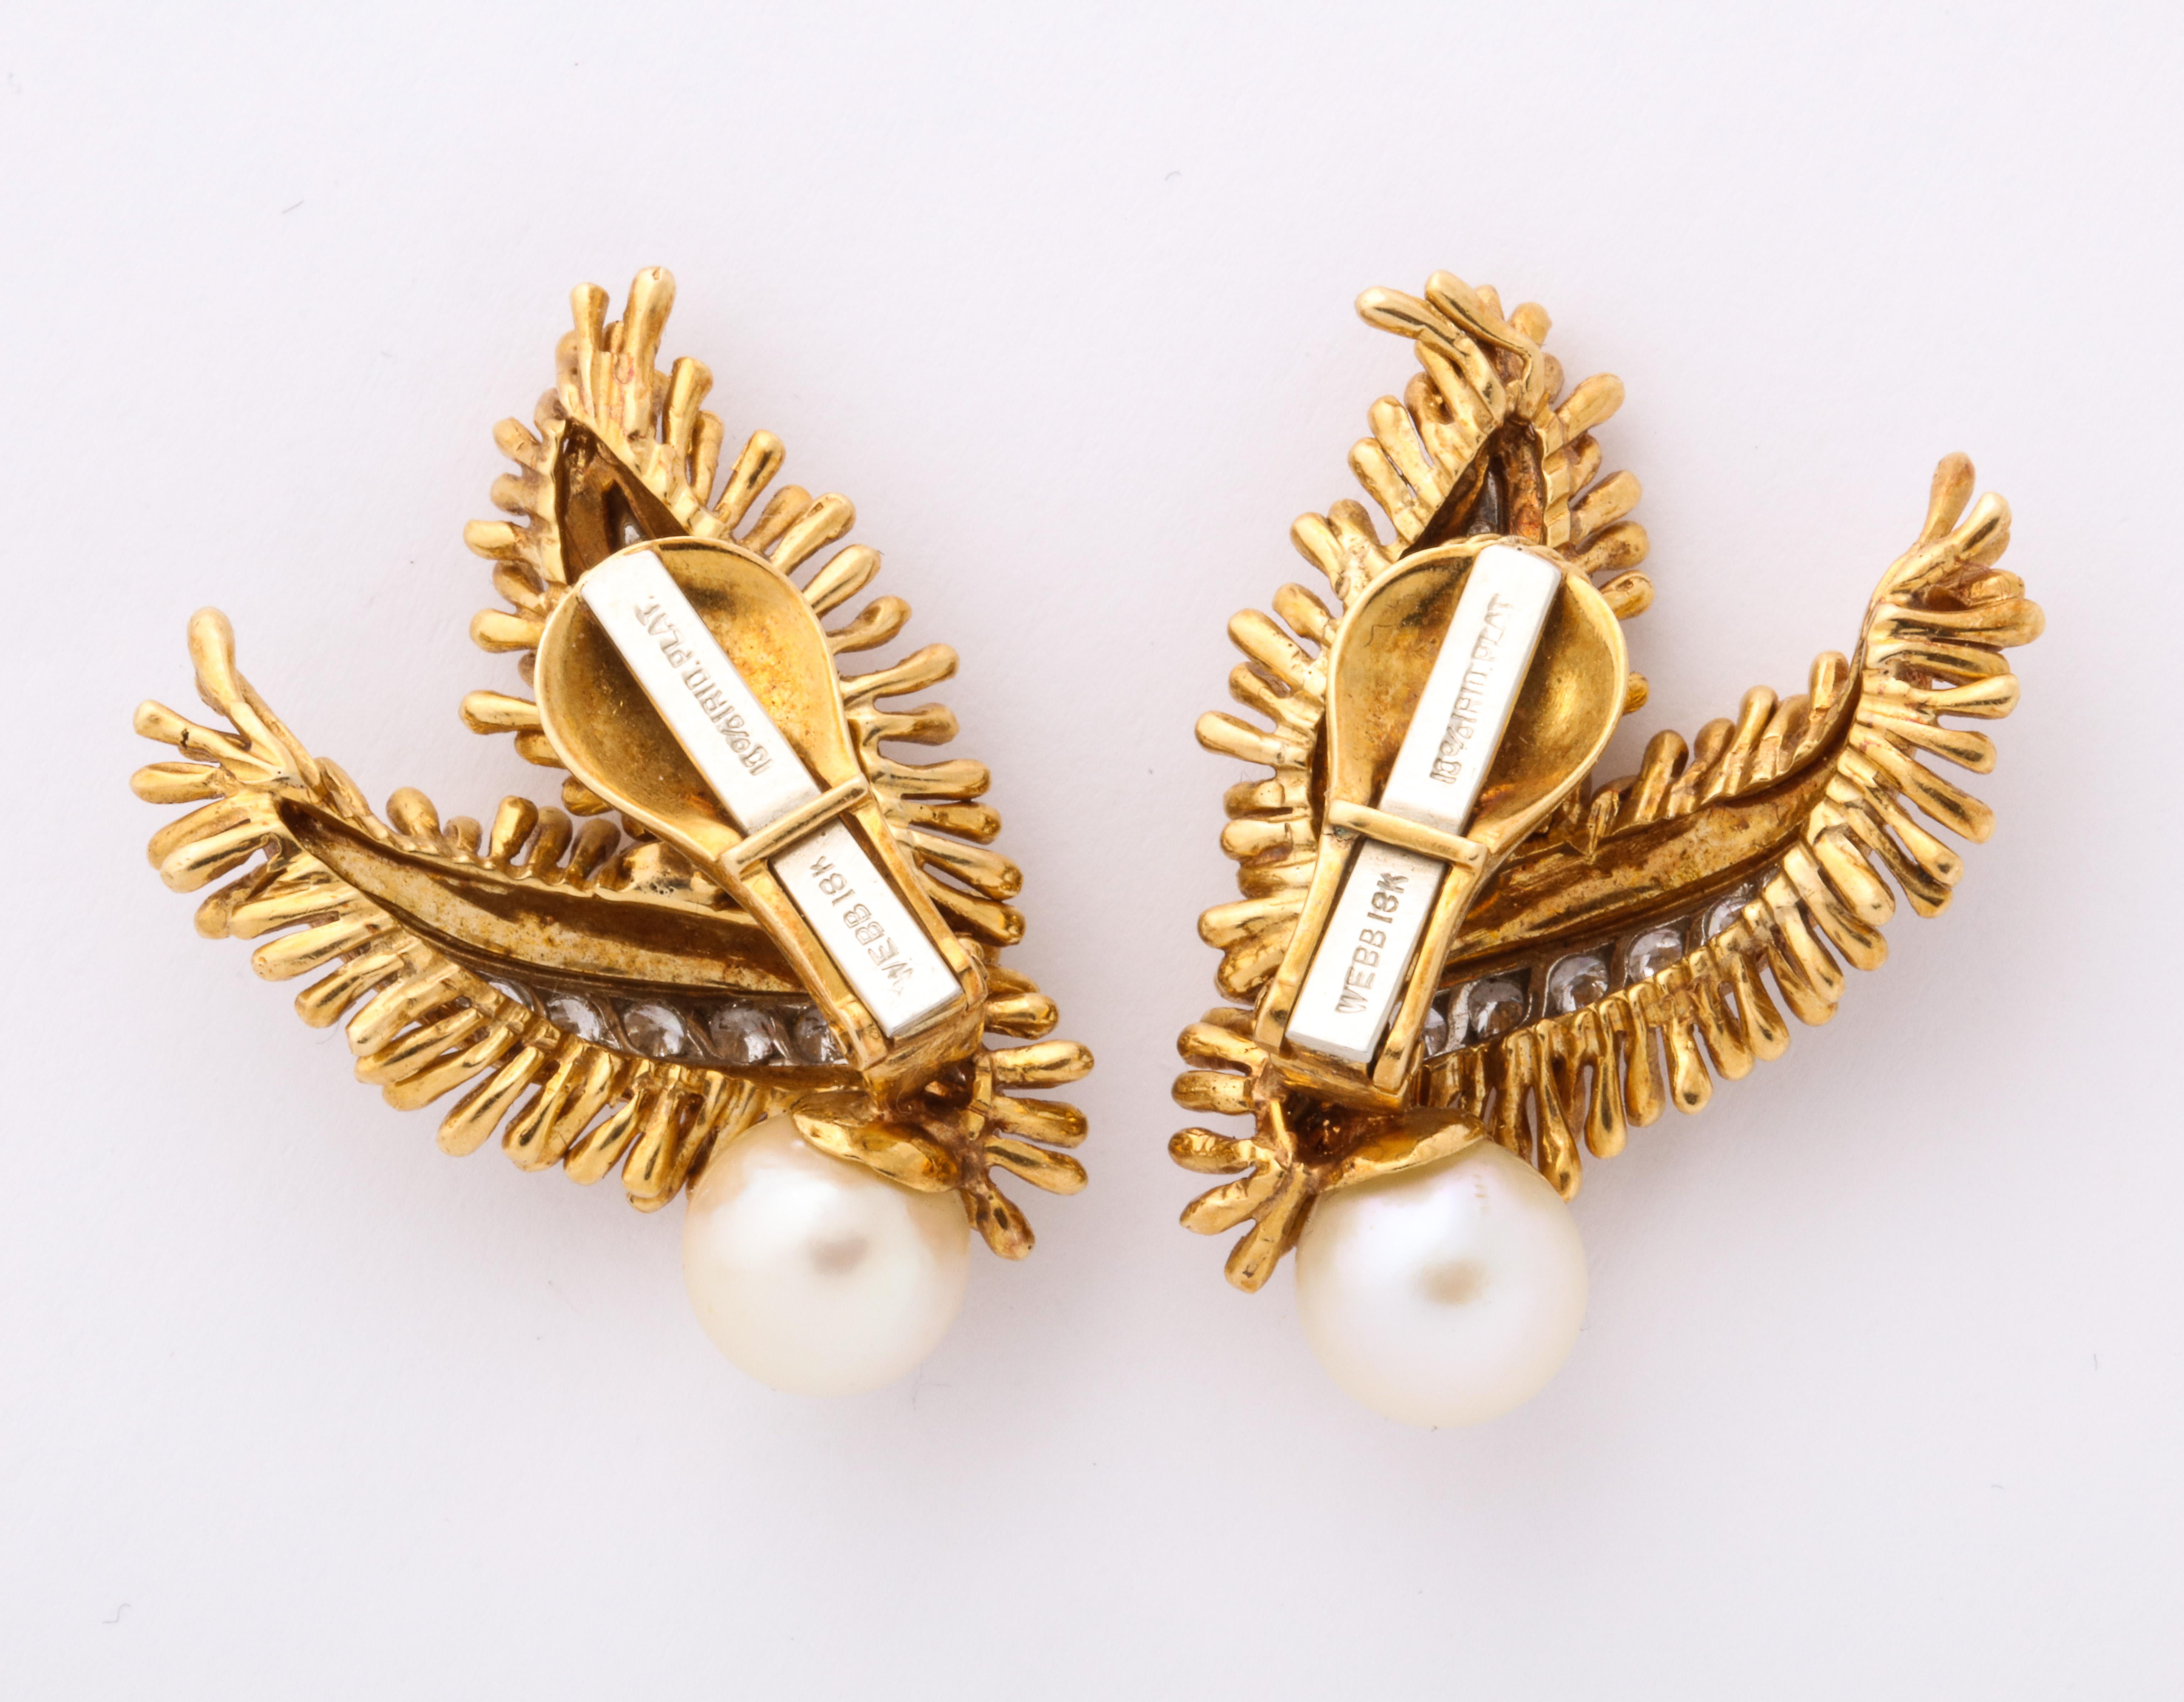 Elegant and versatile 1960s David Webb ear clips of 18K gold fringed leaf shapes set with sparkling diamonds in platinum channels, each holding a single pearl. Measuring 3/4 in x 1 1/4 inch. Gold and platinum mark. Webb mark. Gold weight of 22.7